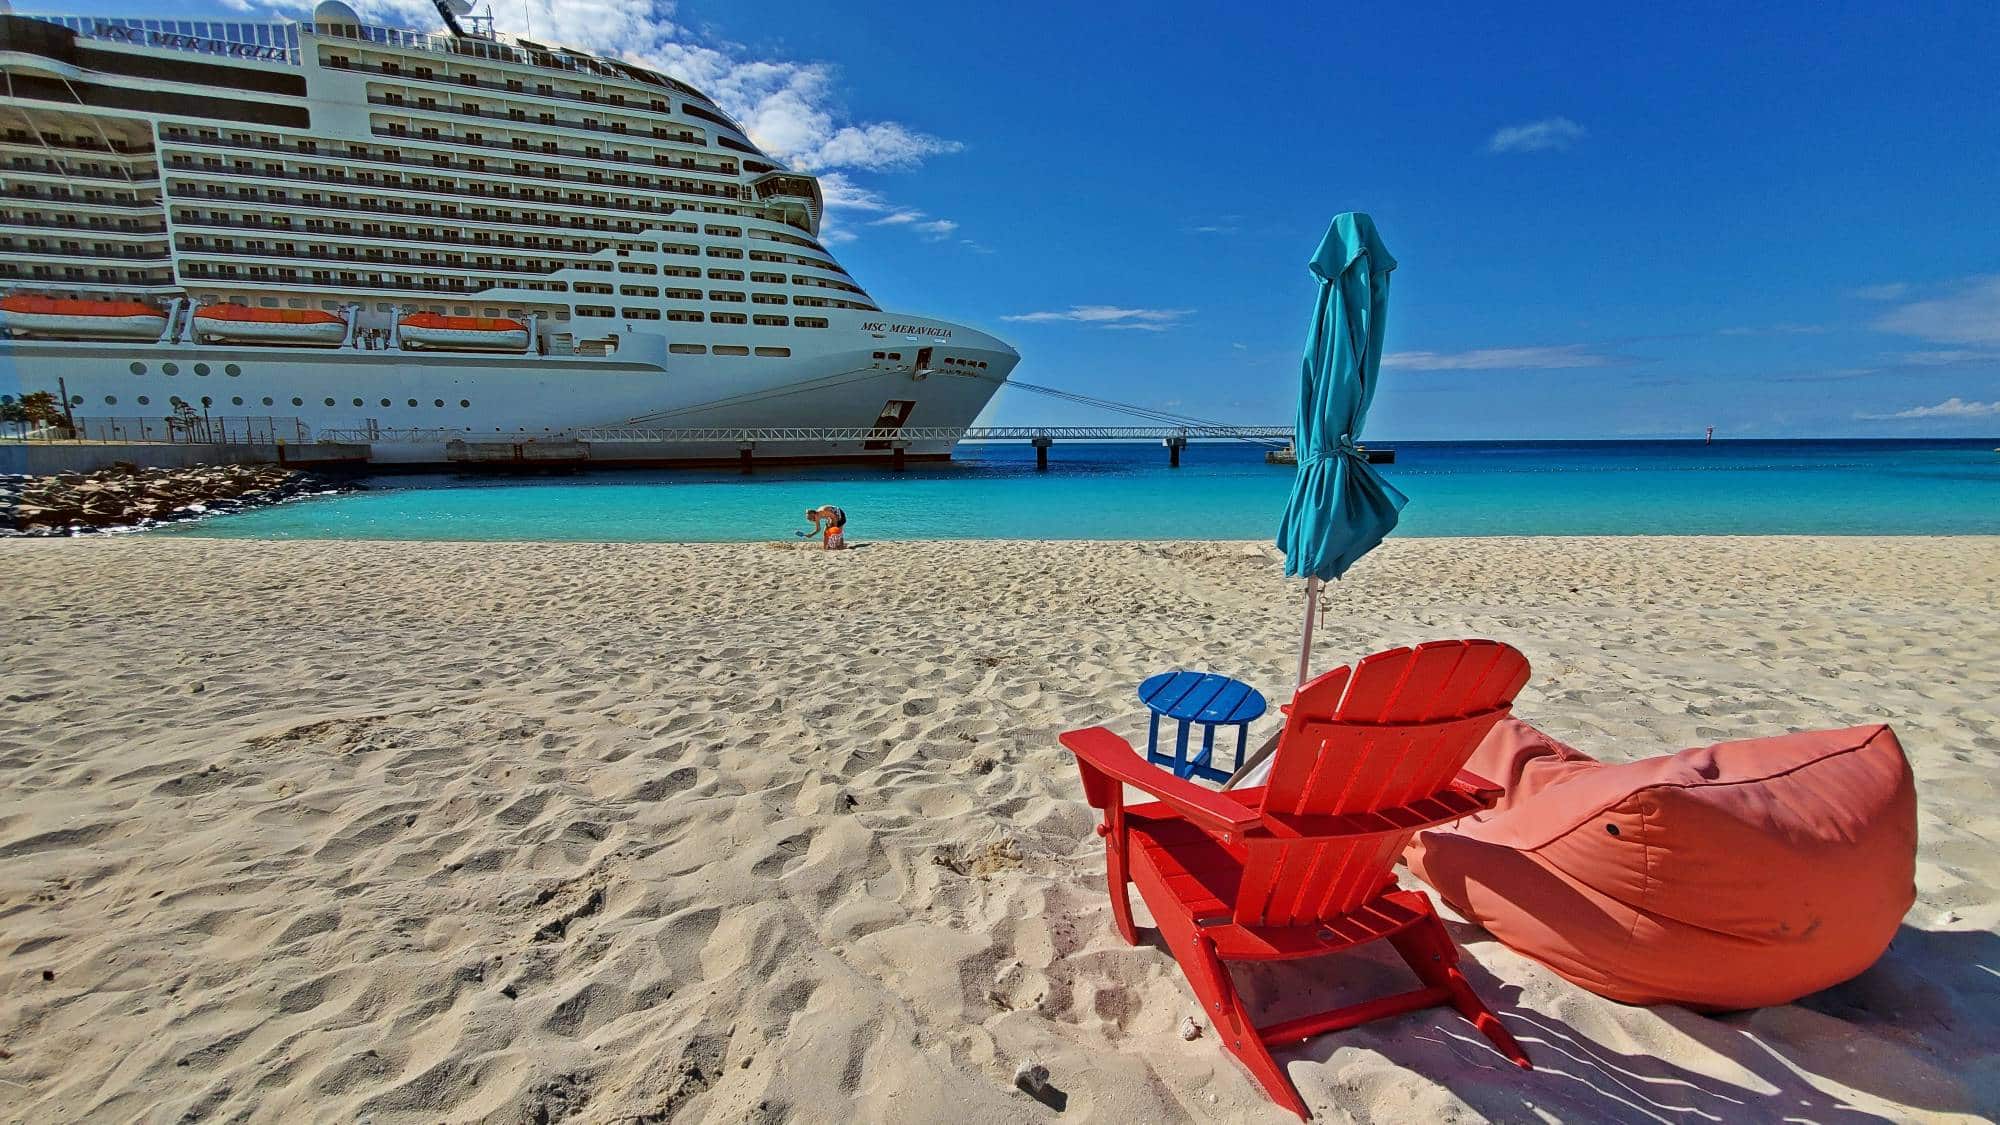 MSC Meraviglia at Ocean Cay with chair on beach